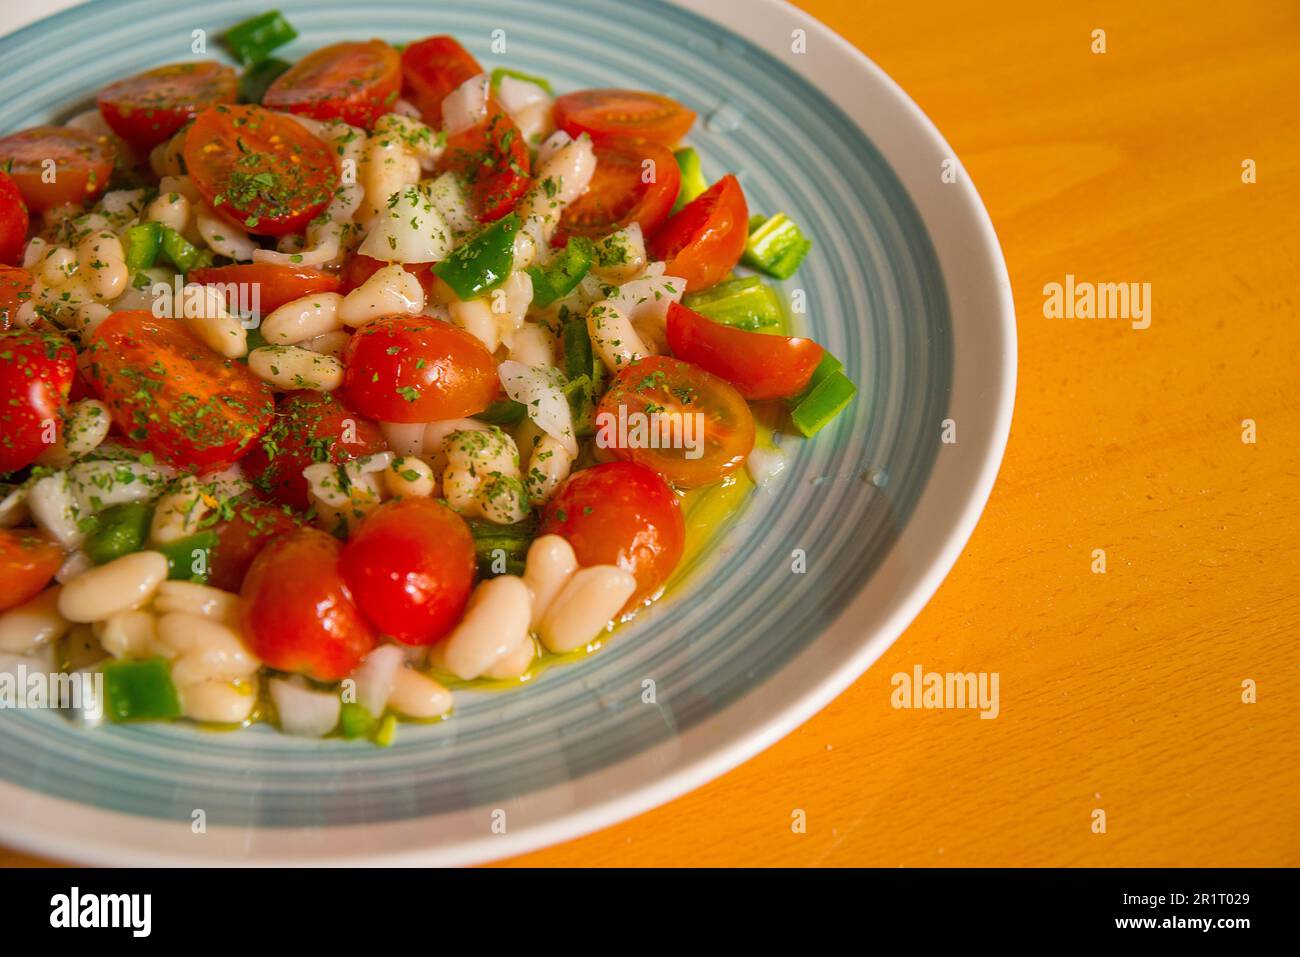 Salad made of beans, cherry tomatoes, green pepper, onion, parsley and olive oil. Stock Photo